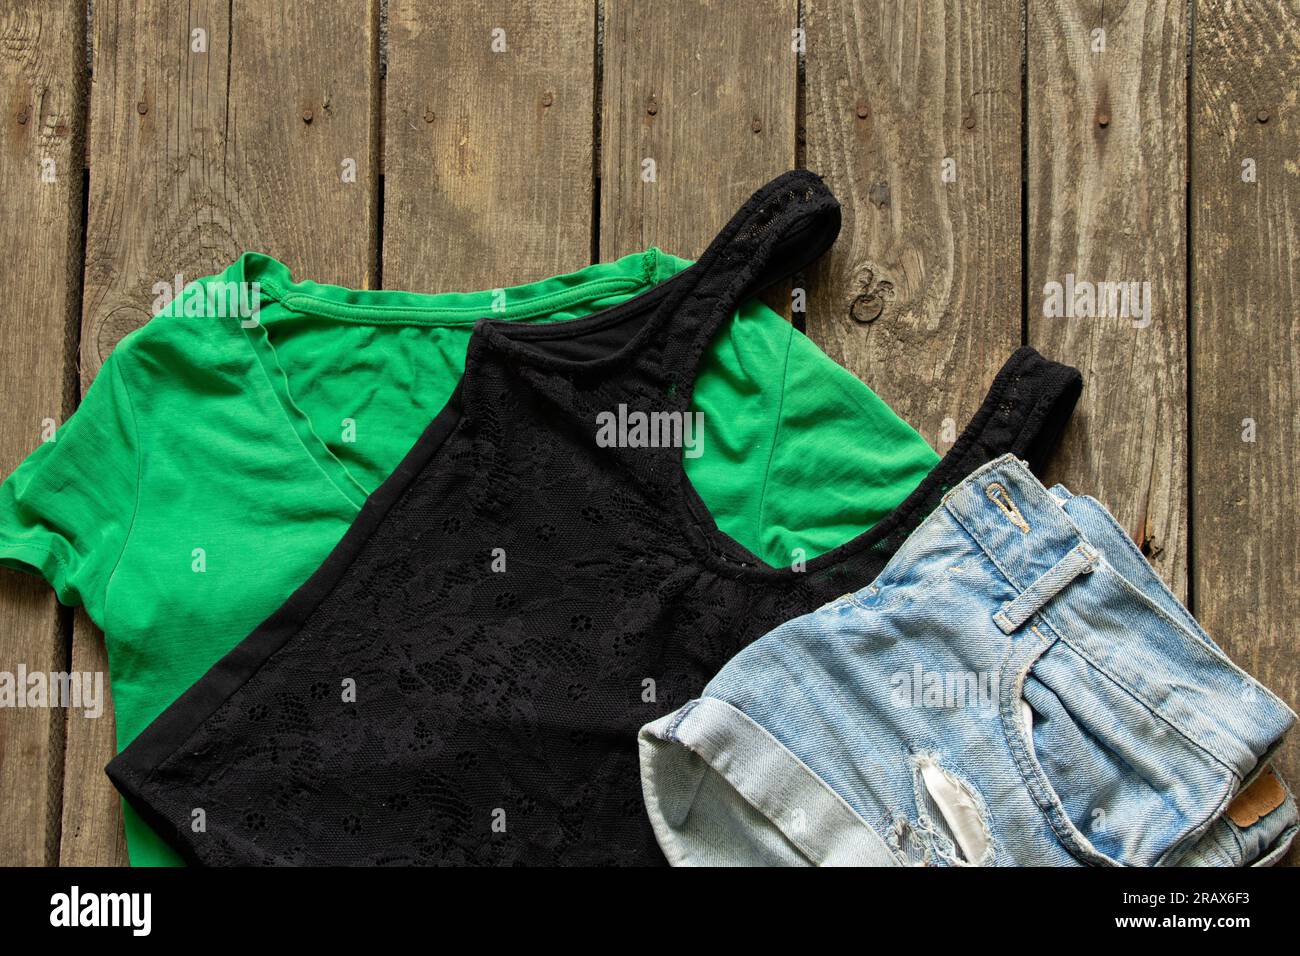 women's clothing shorts and t-shirts green and black on a wooden background close-up, women's clothing Stock Photo